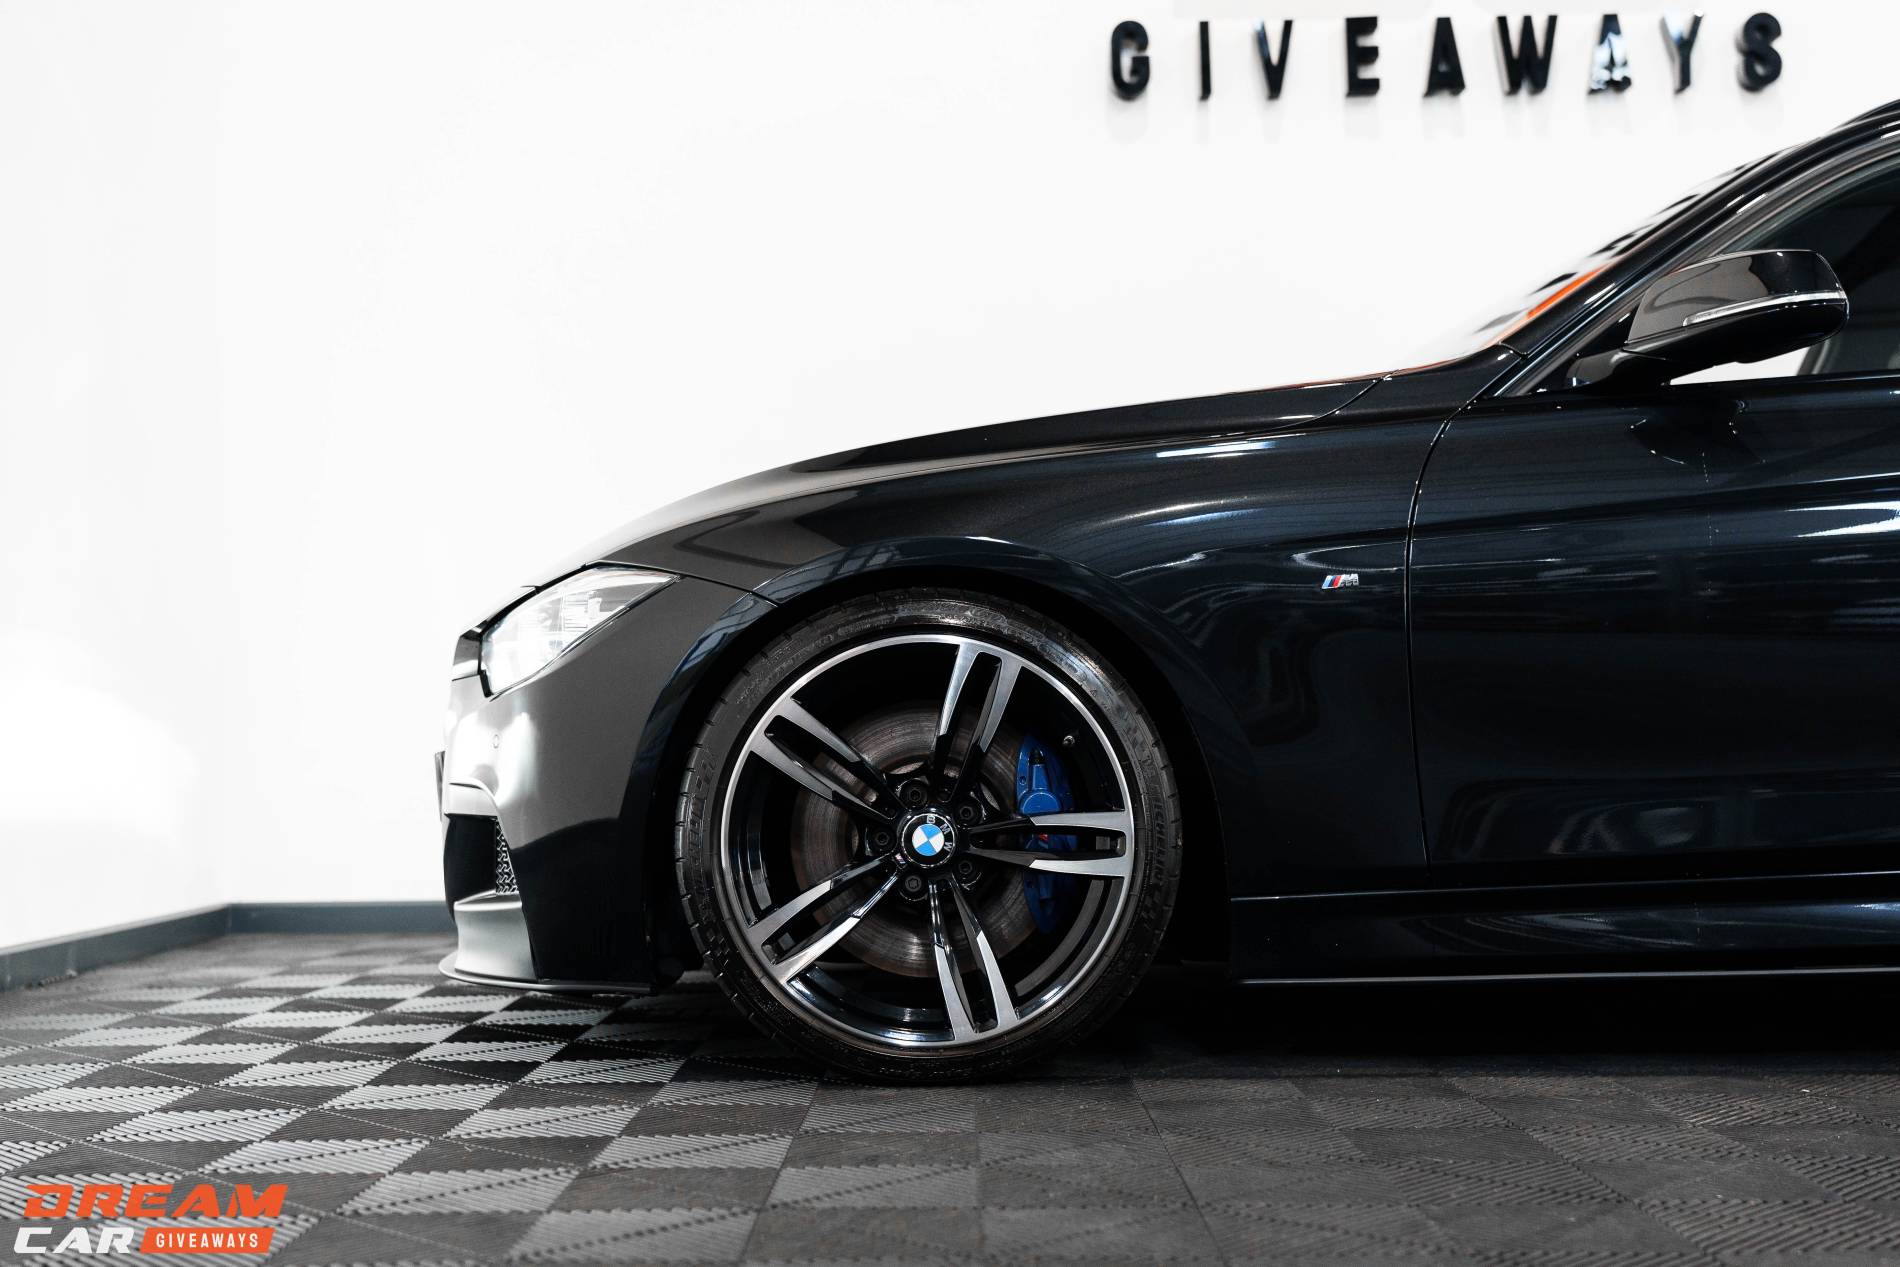 Win this BMW 335d XDrive & £1,000 or £20,000 Tax Free